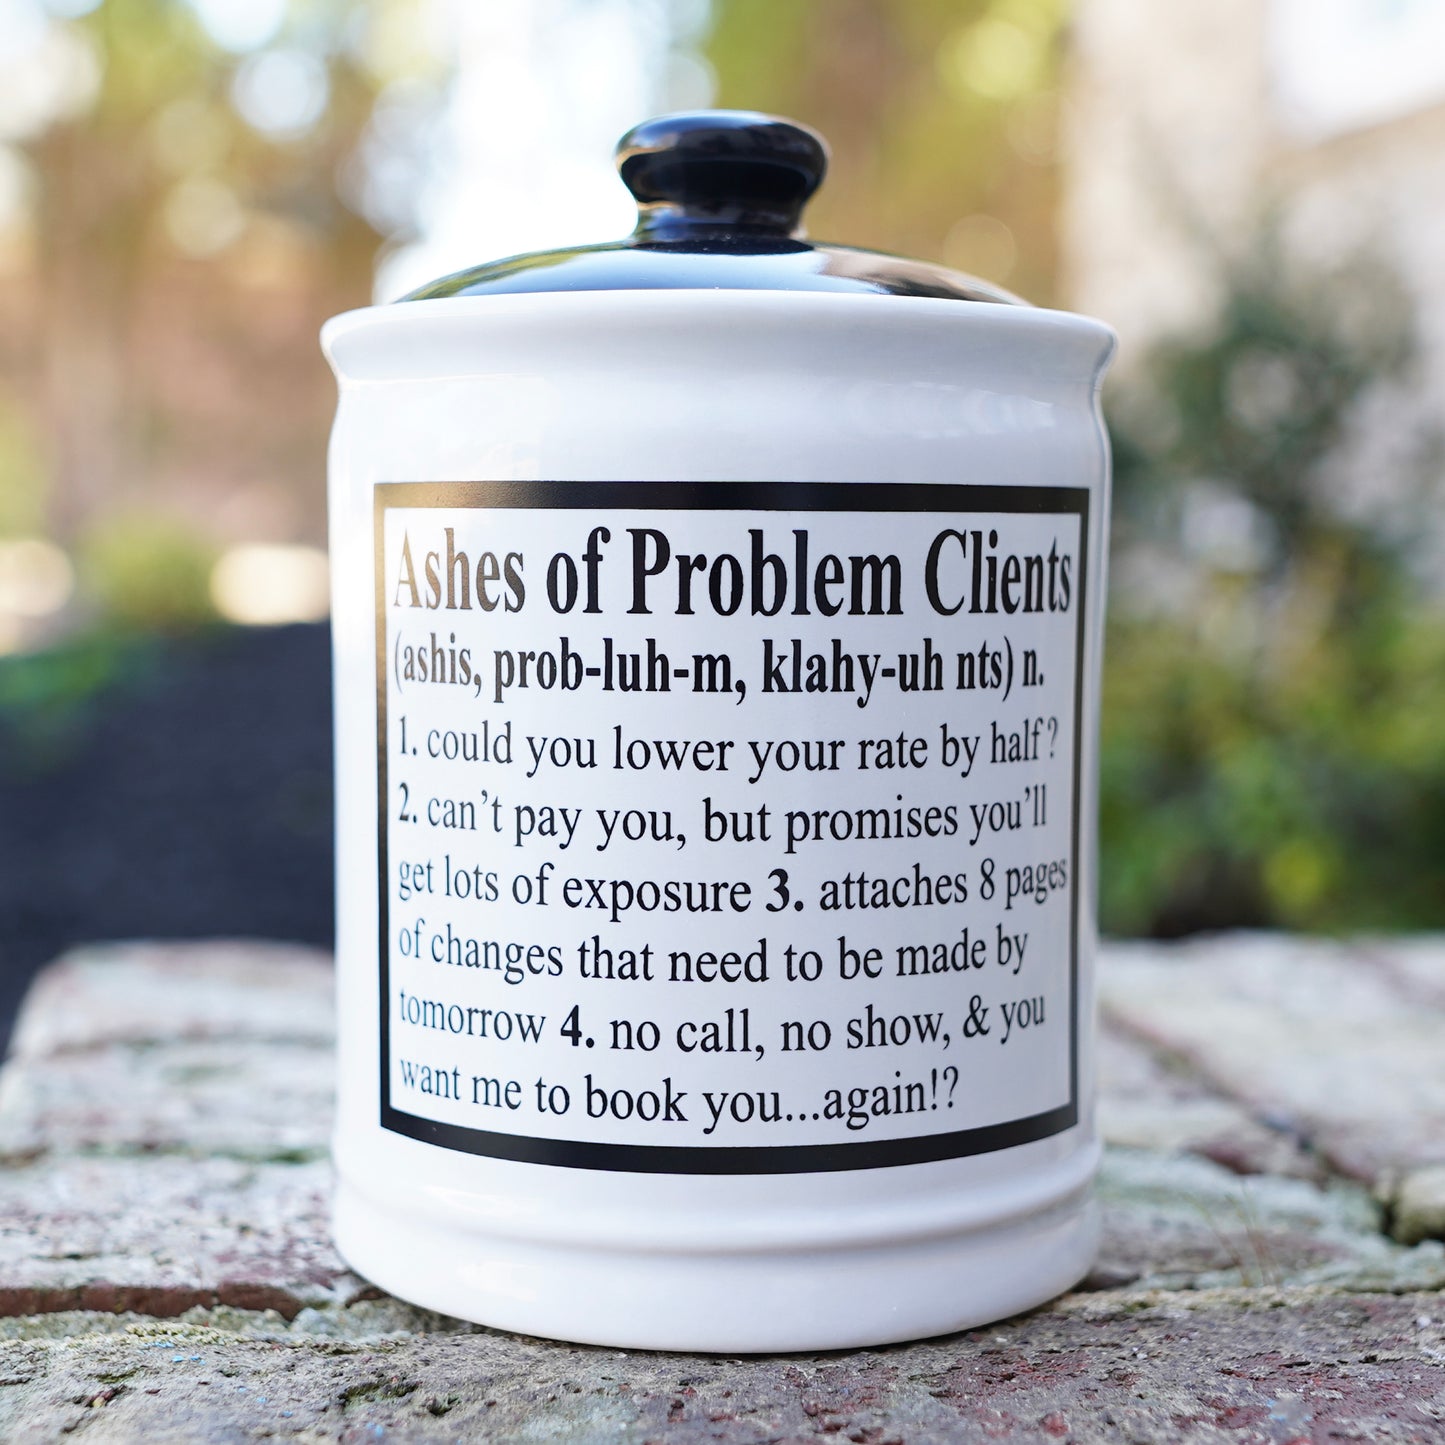 Cottage Creek Ashes of Problem Clients Piggy Bank, 6", Ceramic, Multicolored Fun Candy Jar, Coworker Gifts